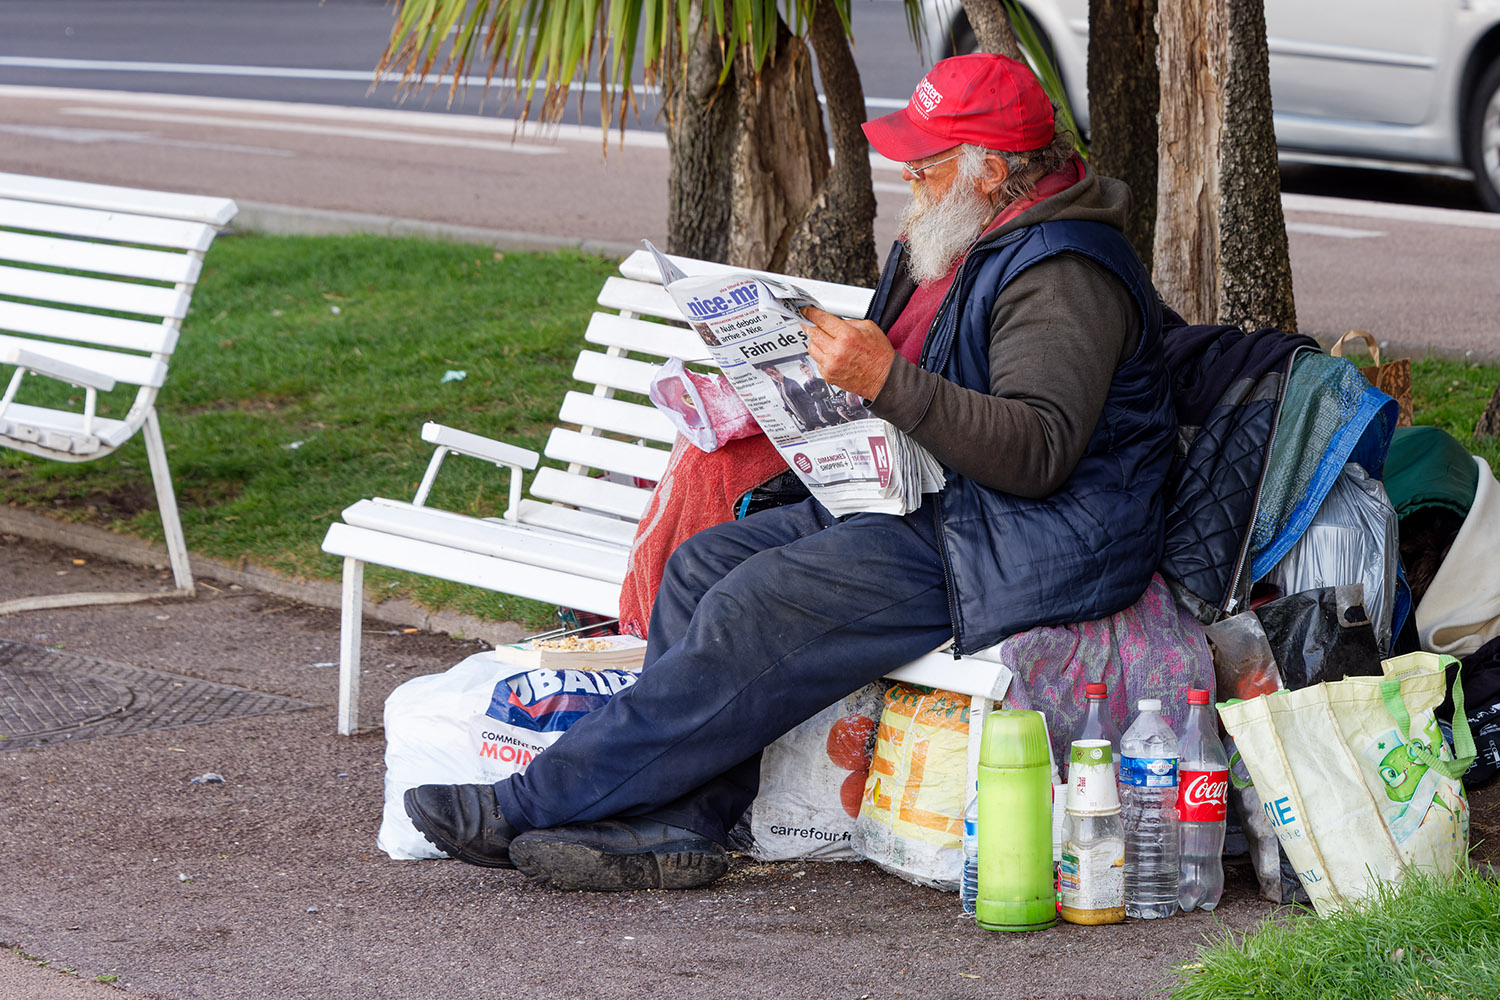 Homeless Man Keeping Up With the News